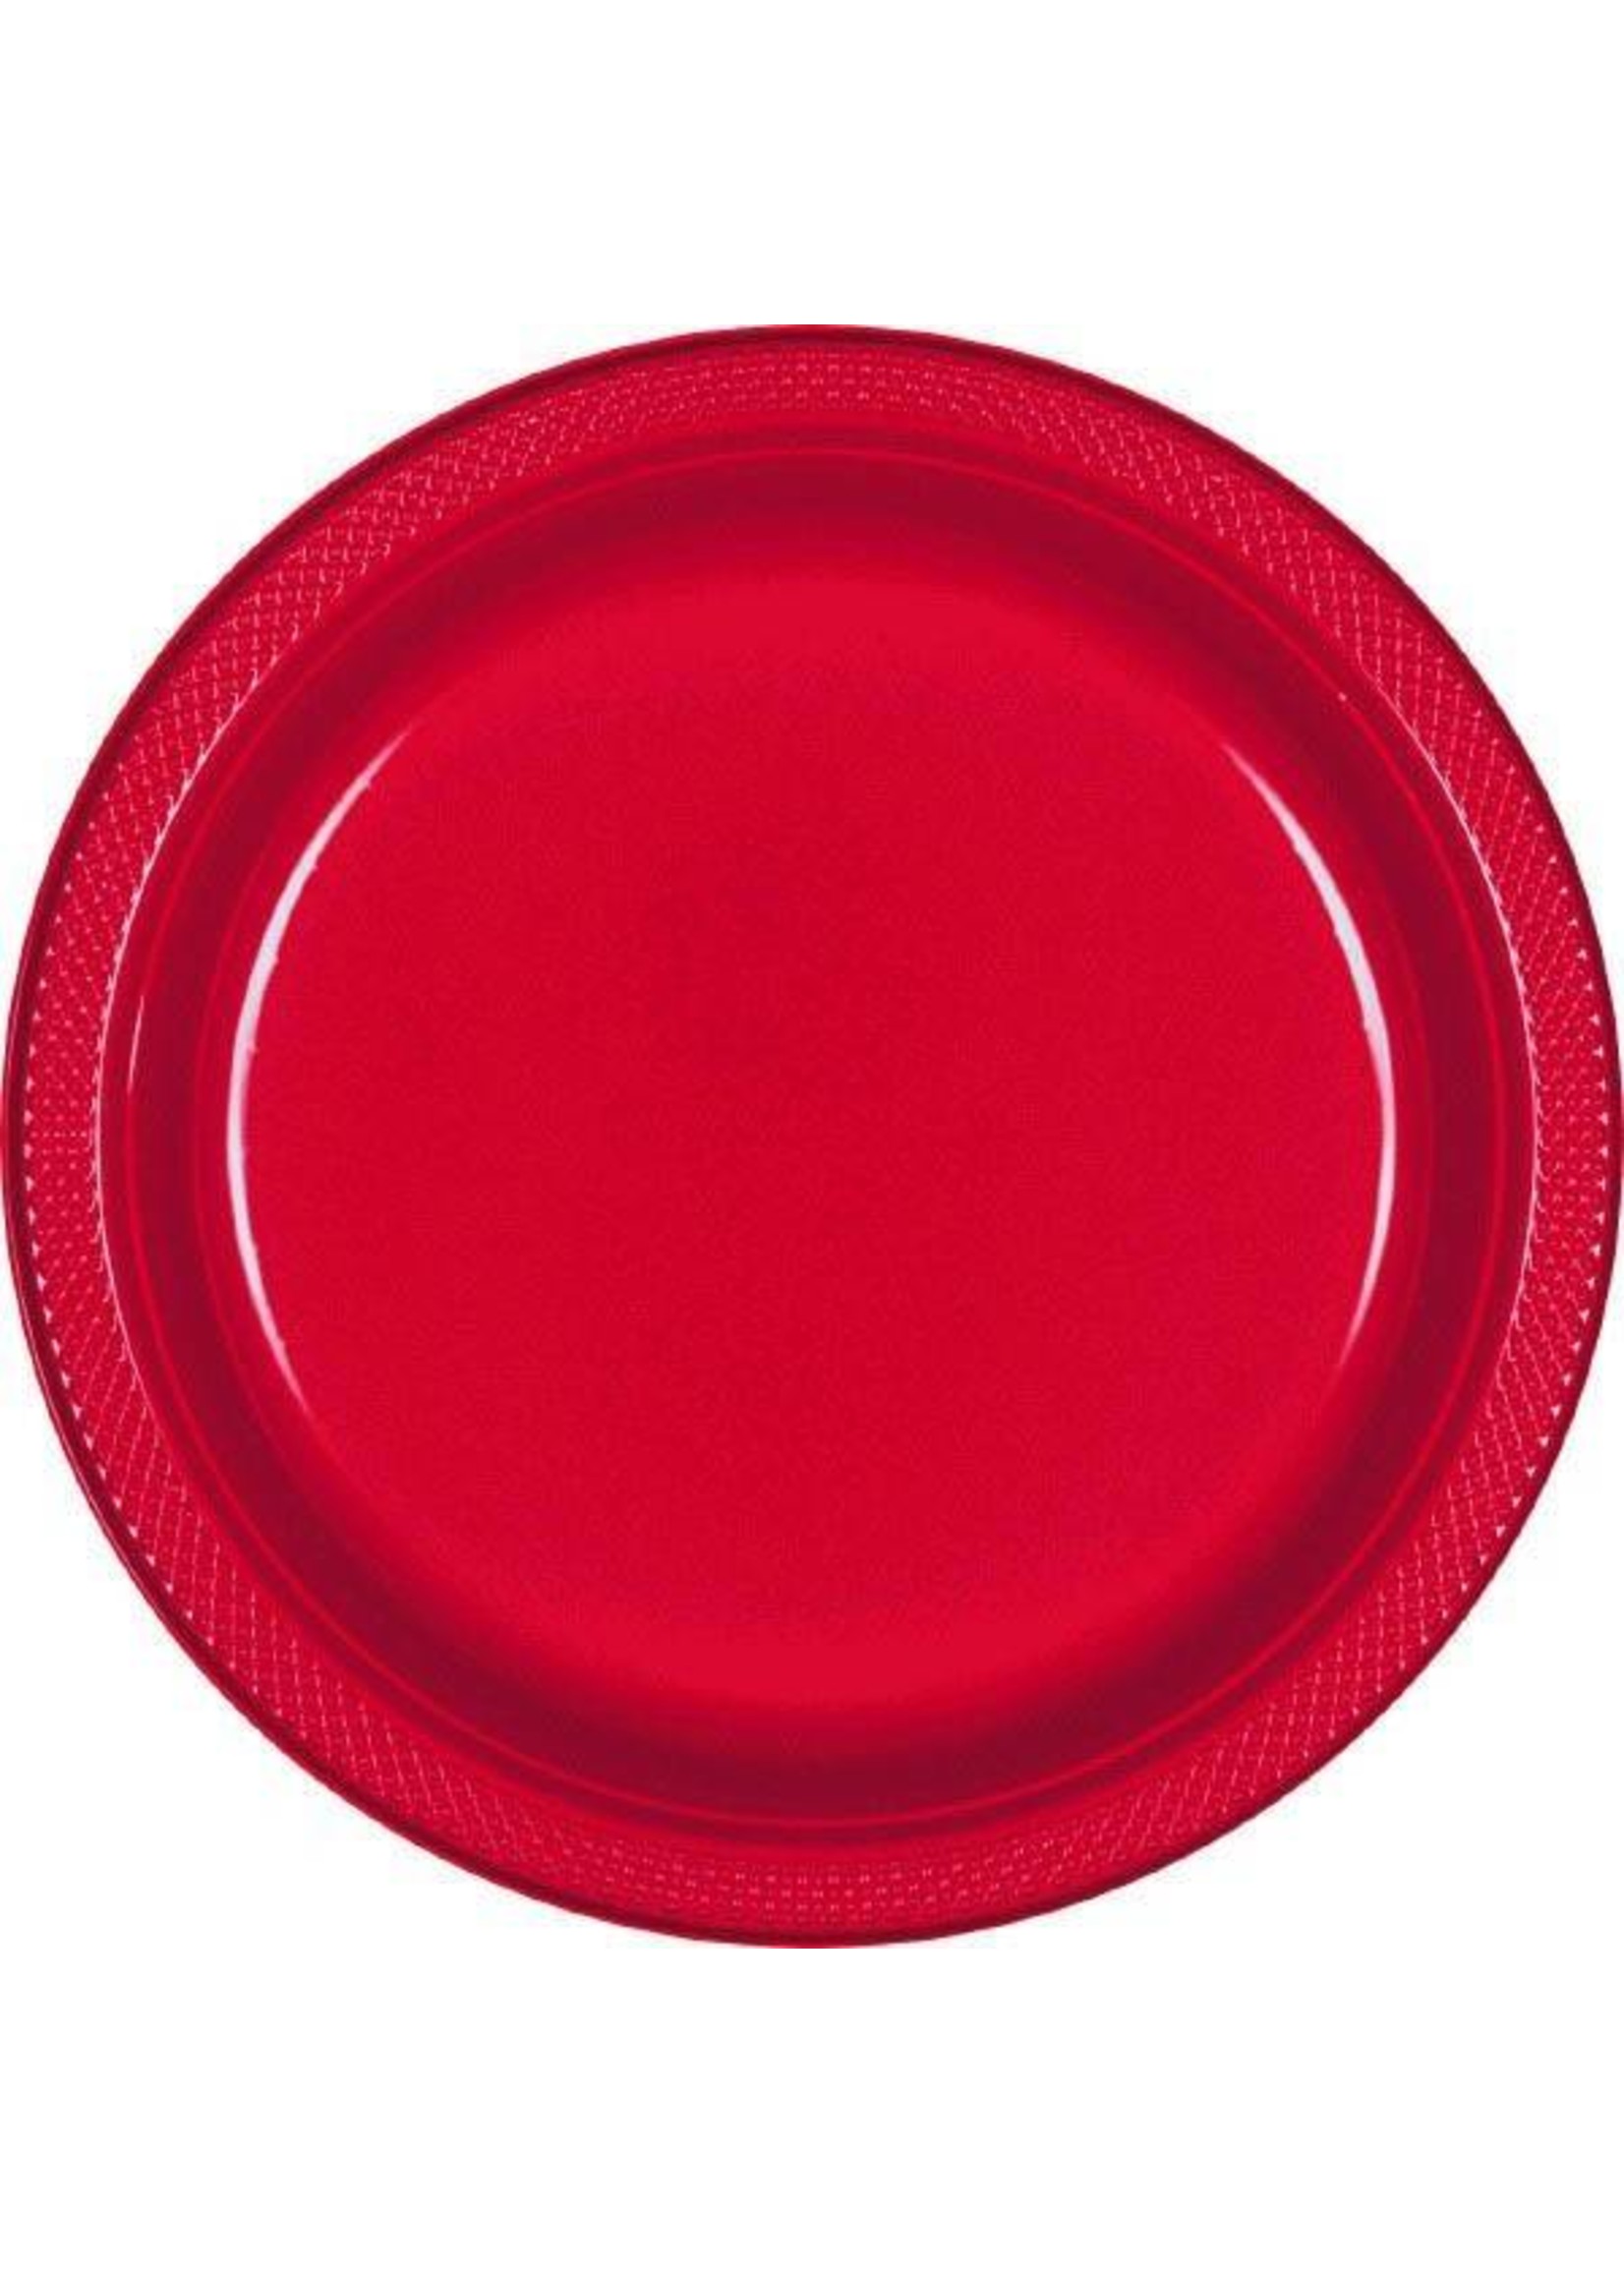 Amscan 9'' ROUND PLASTIC PLATES (20PC) - APPLE RED